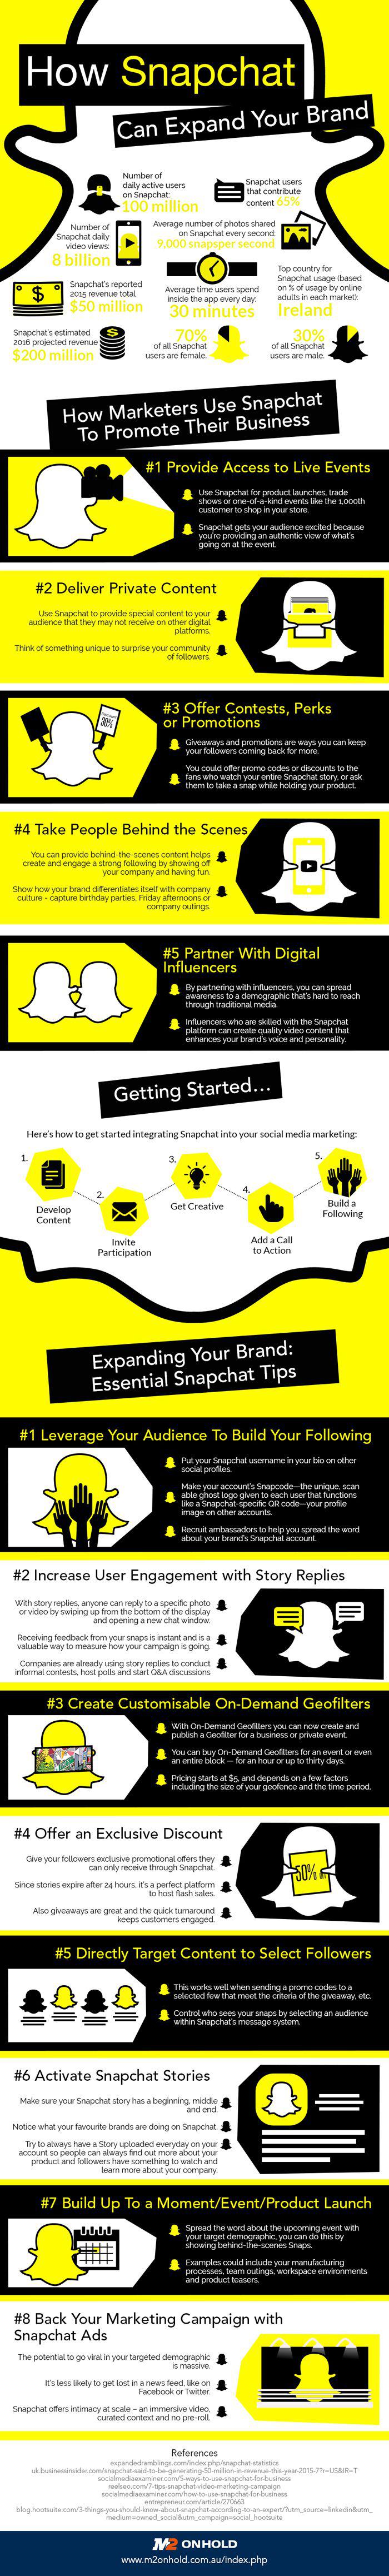 Snapchat Marketing - The Ultimate Guide